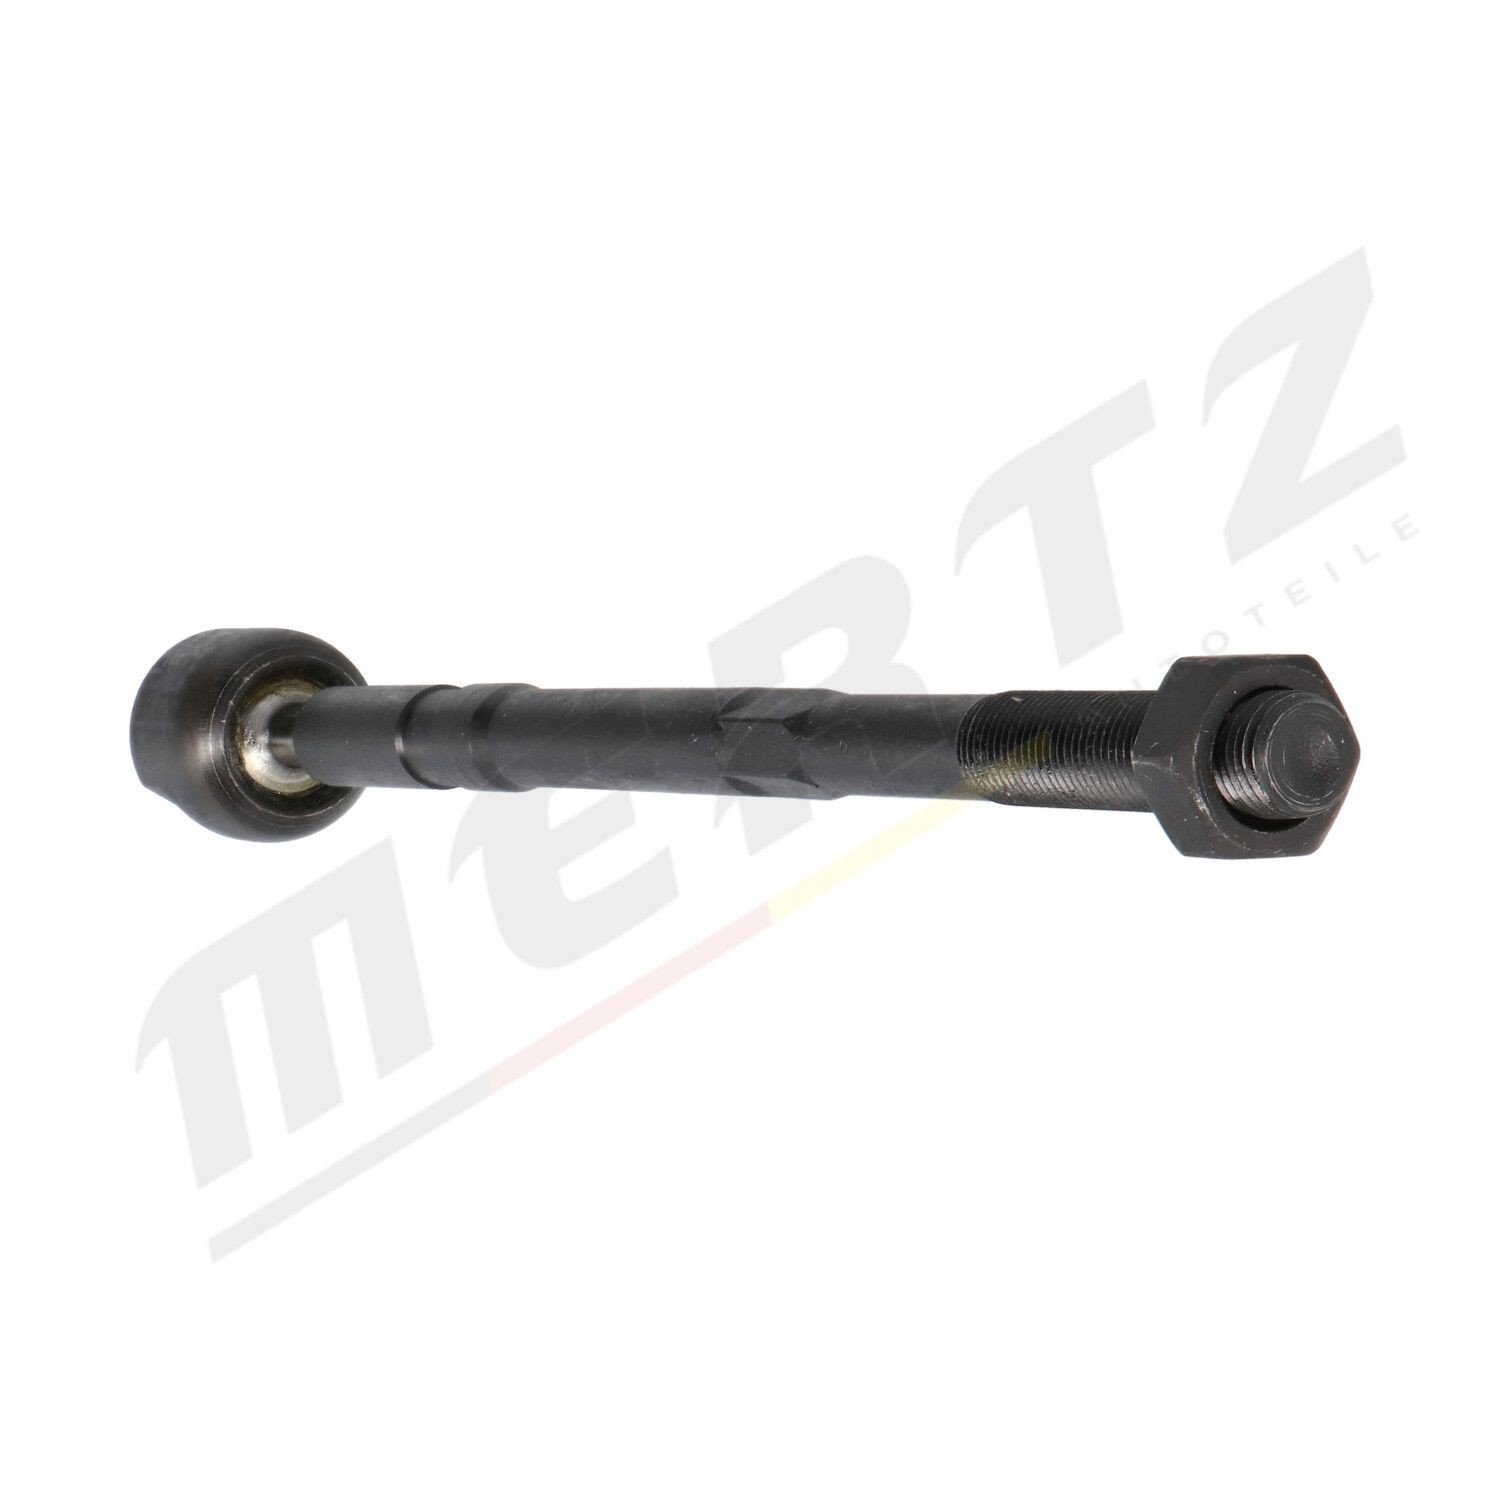 M-S0563 Steering rack end M-S0563 MERTZ Front Axle Left, Front Axle Right, 338 mm